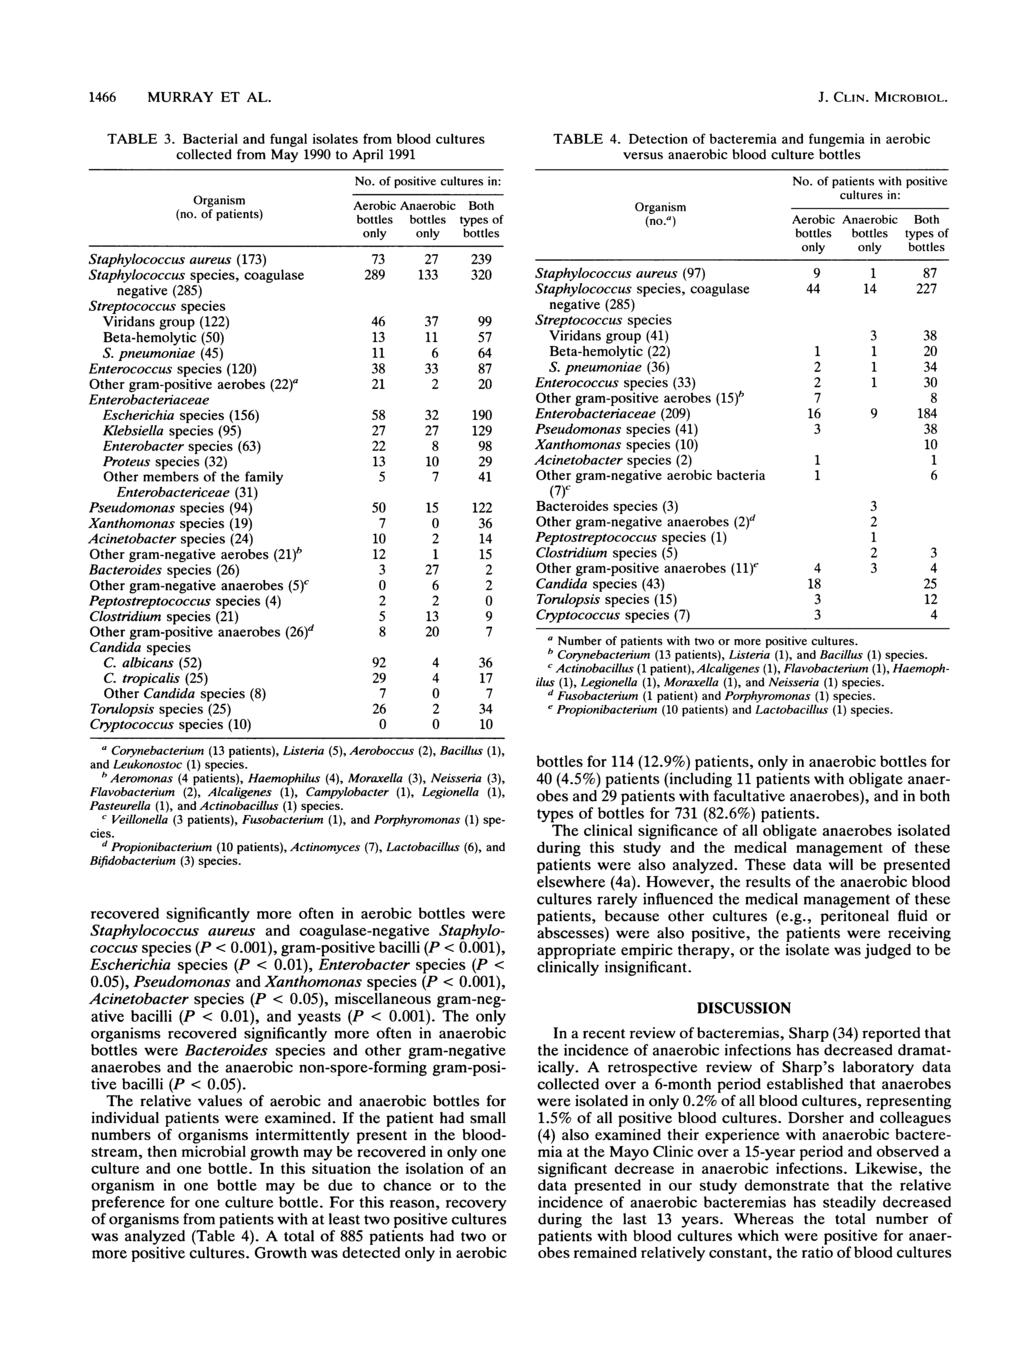 1466 MURRAY ET AL. TABLE 3. Bacterial and fungal isolates from blood cultures collected from May 199 to April 1991 No. of positive cultures in: Organism Aerobic Anaerobic Both (no.